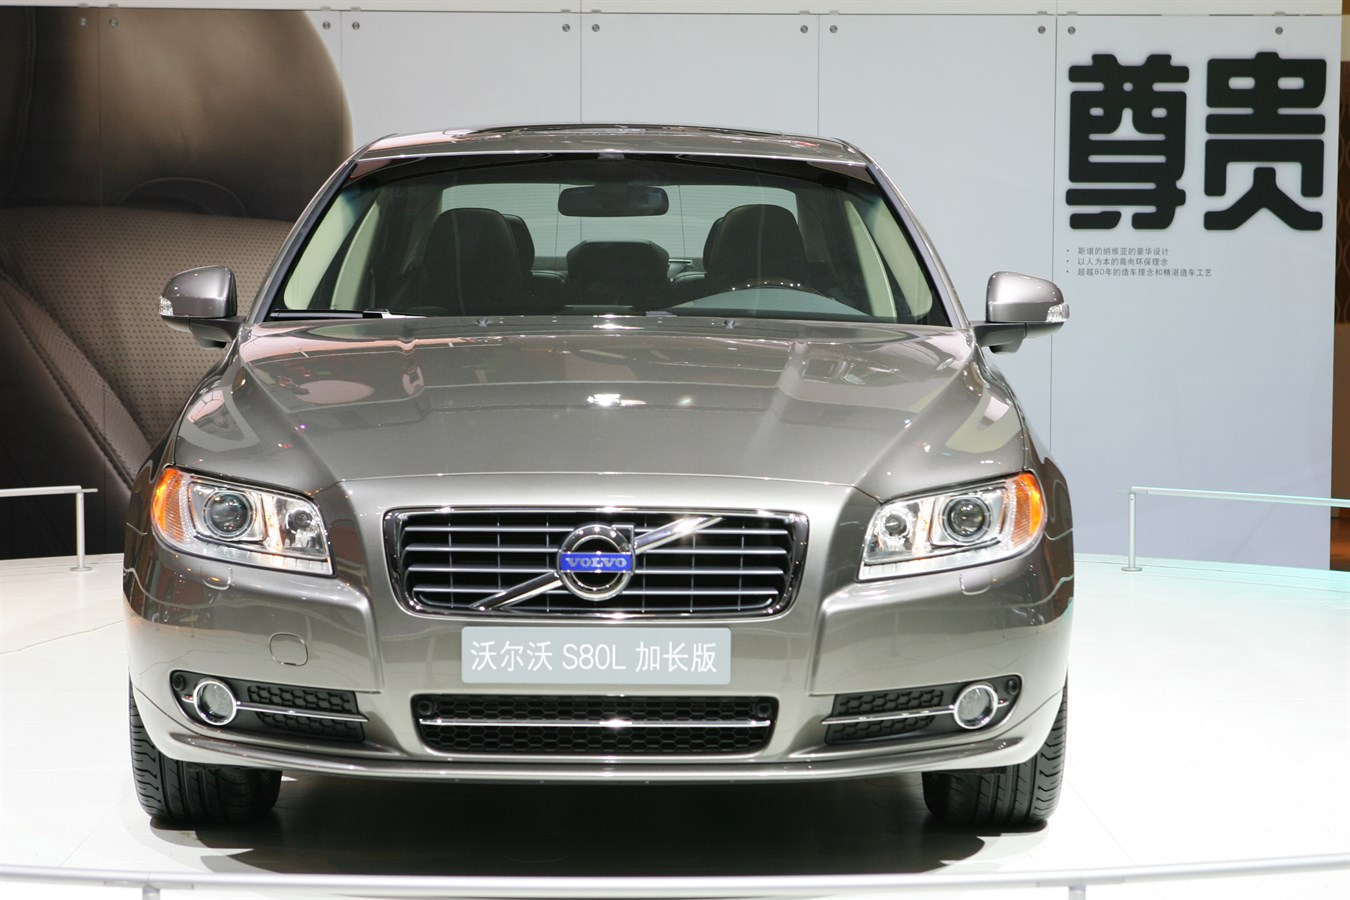 Volvo S80L - long wheelbase, built for the Chinese market (front)